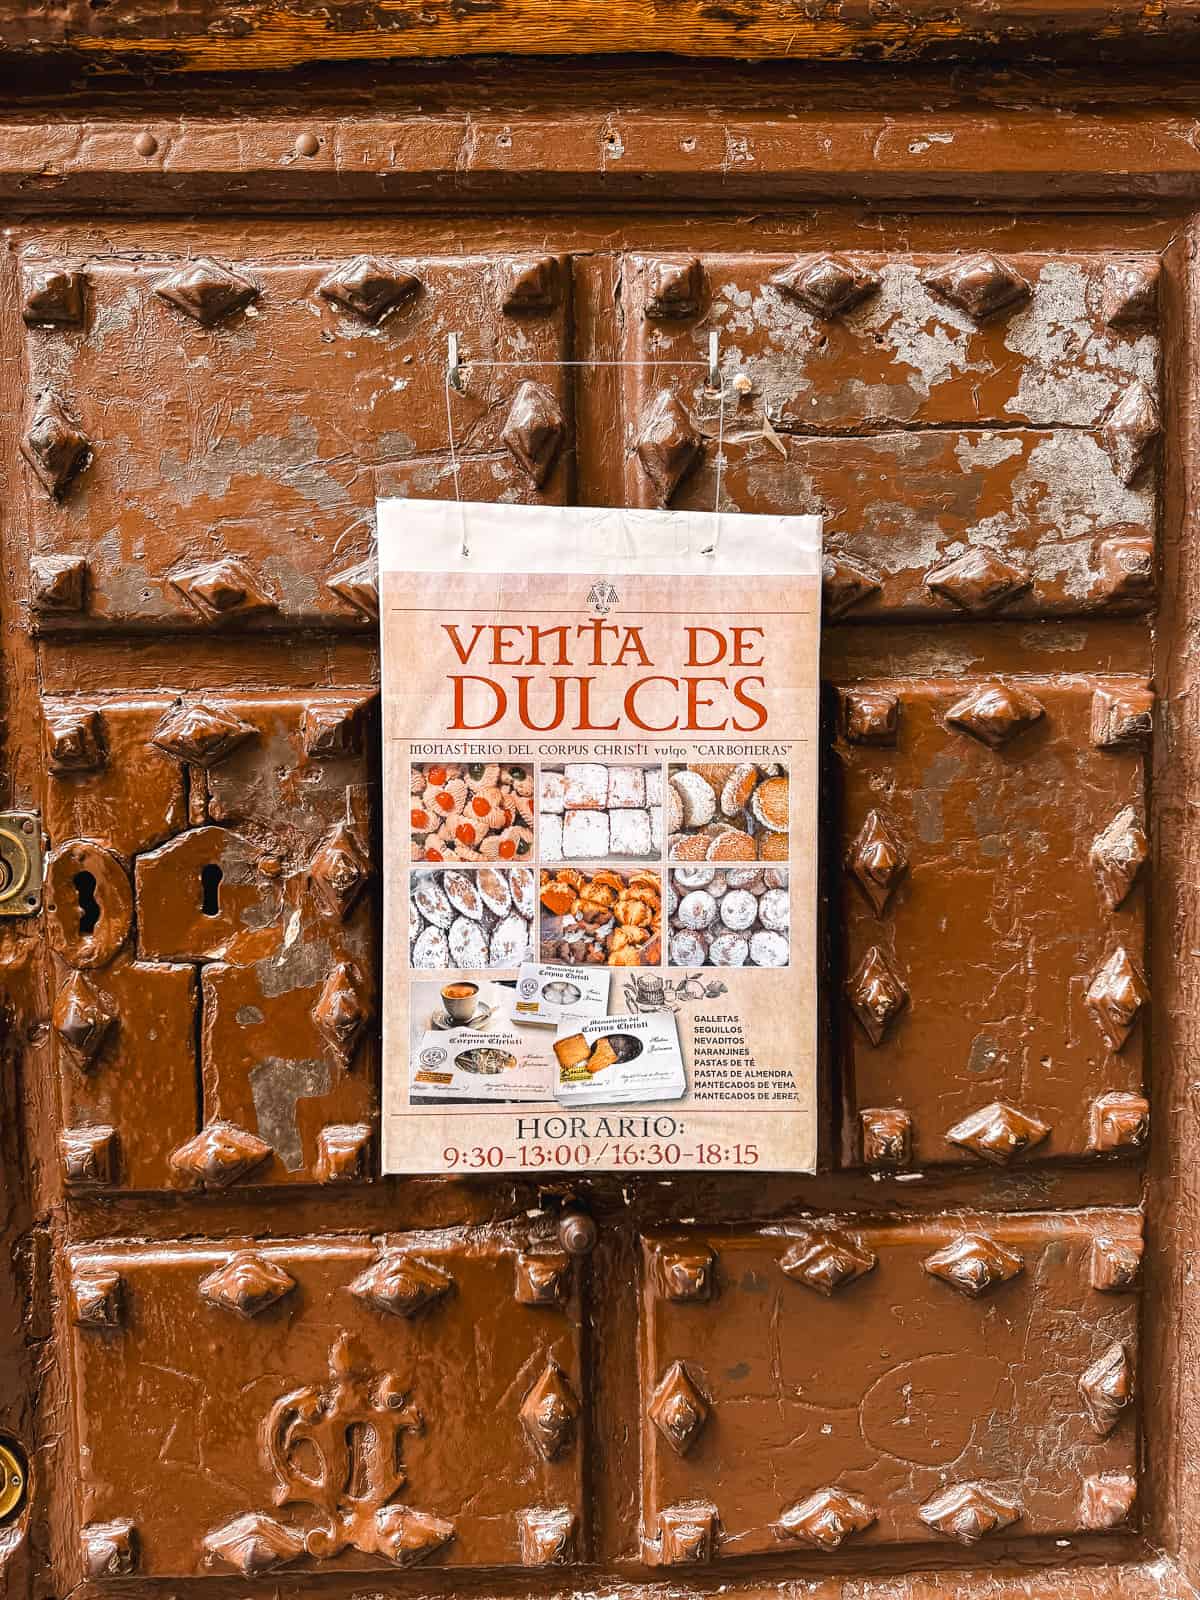 A weathered flyer for 'Venta de Dulces' with images of pastries and sale hours, pinned on an old textured wooden door.